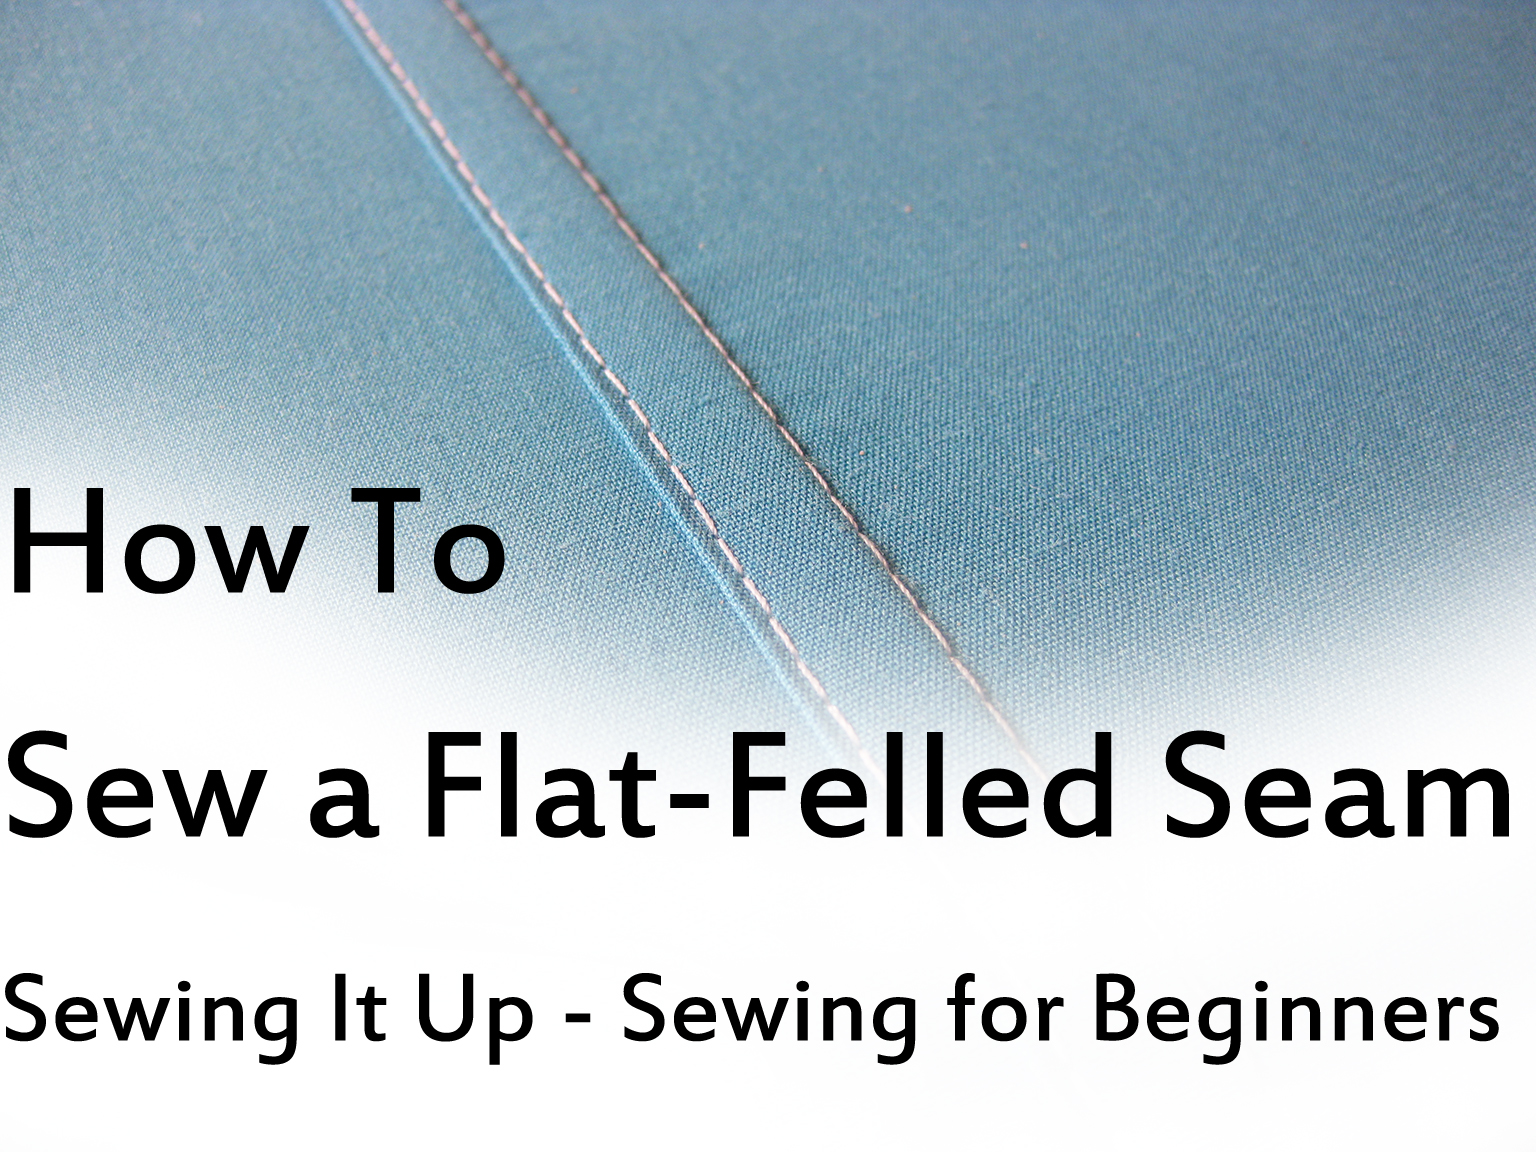 Download Sewing It Up